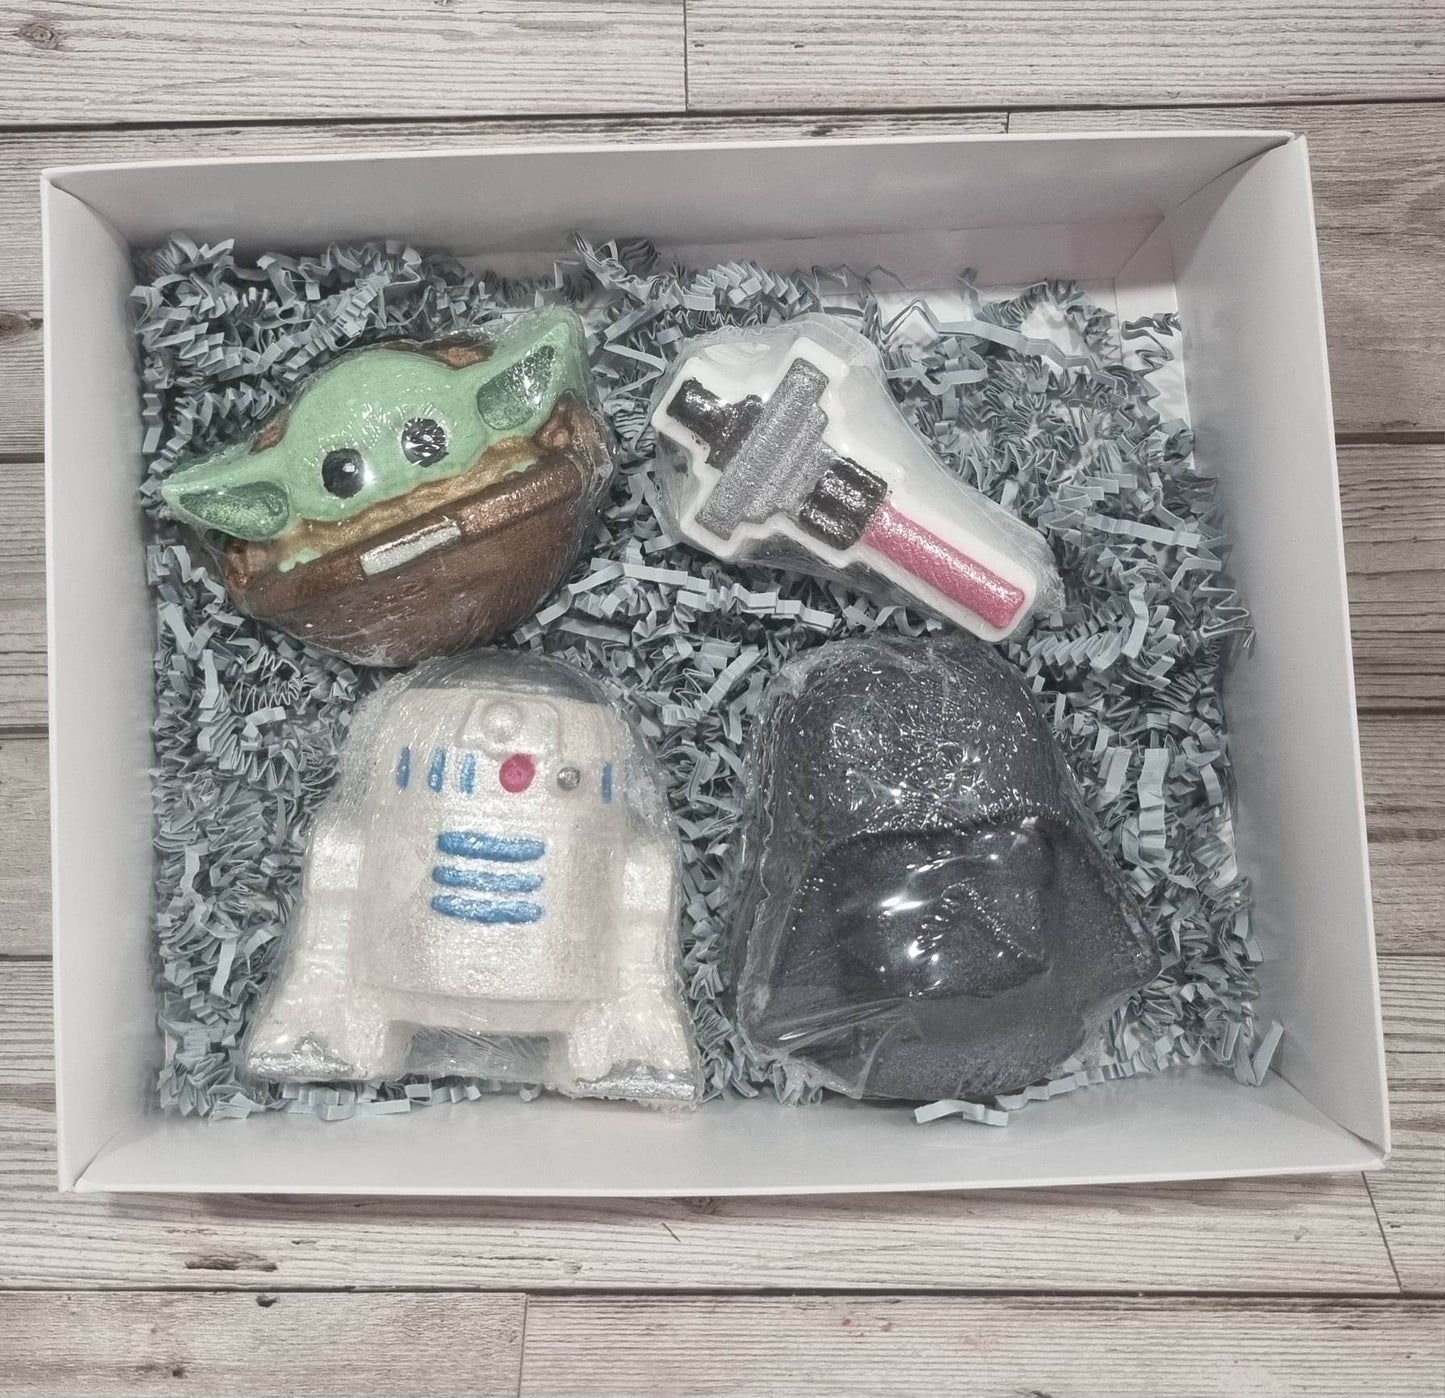 'May the Force be with you' Bath Bomb Gift Set